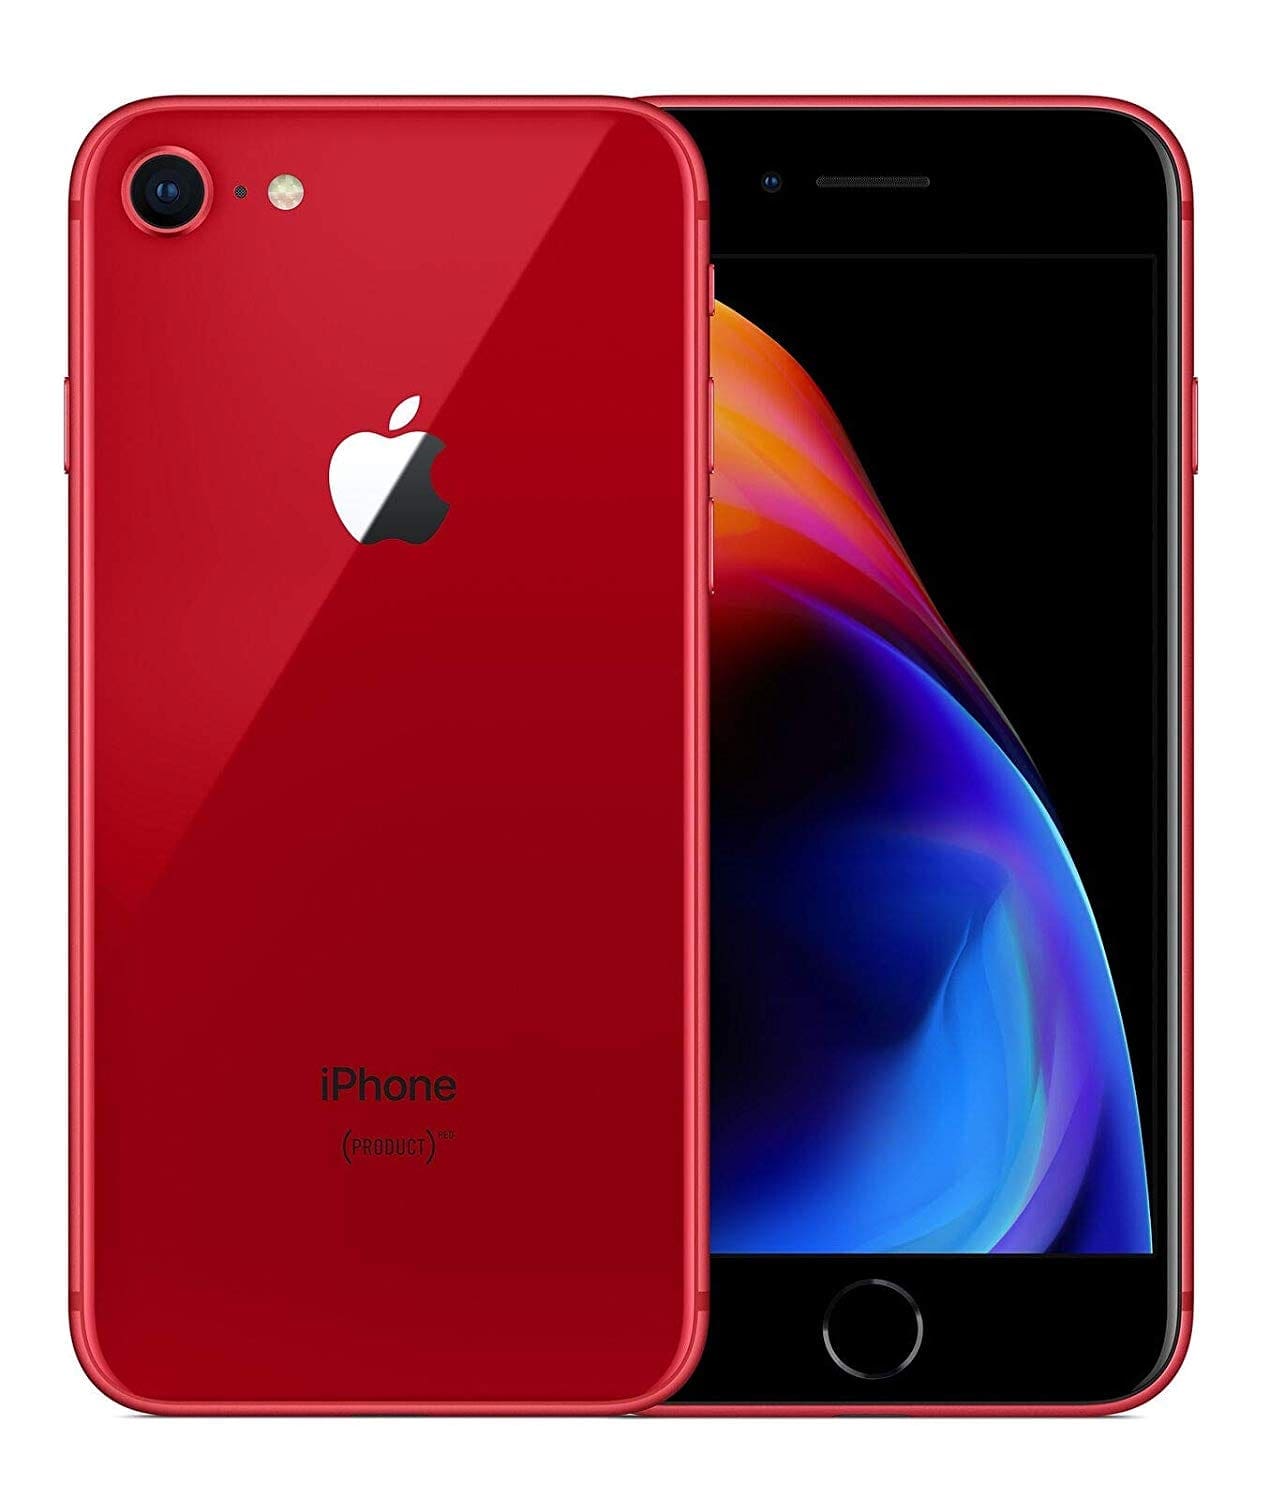 Apple iPhone 8 (64 GB) Review - Technipages